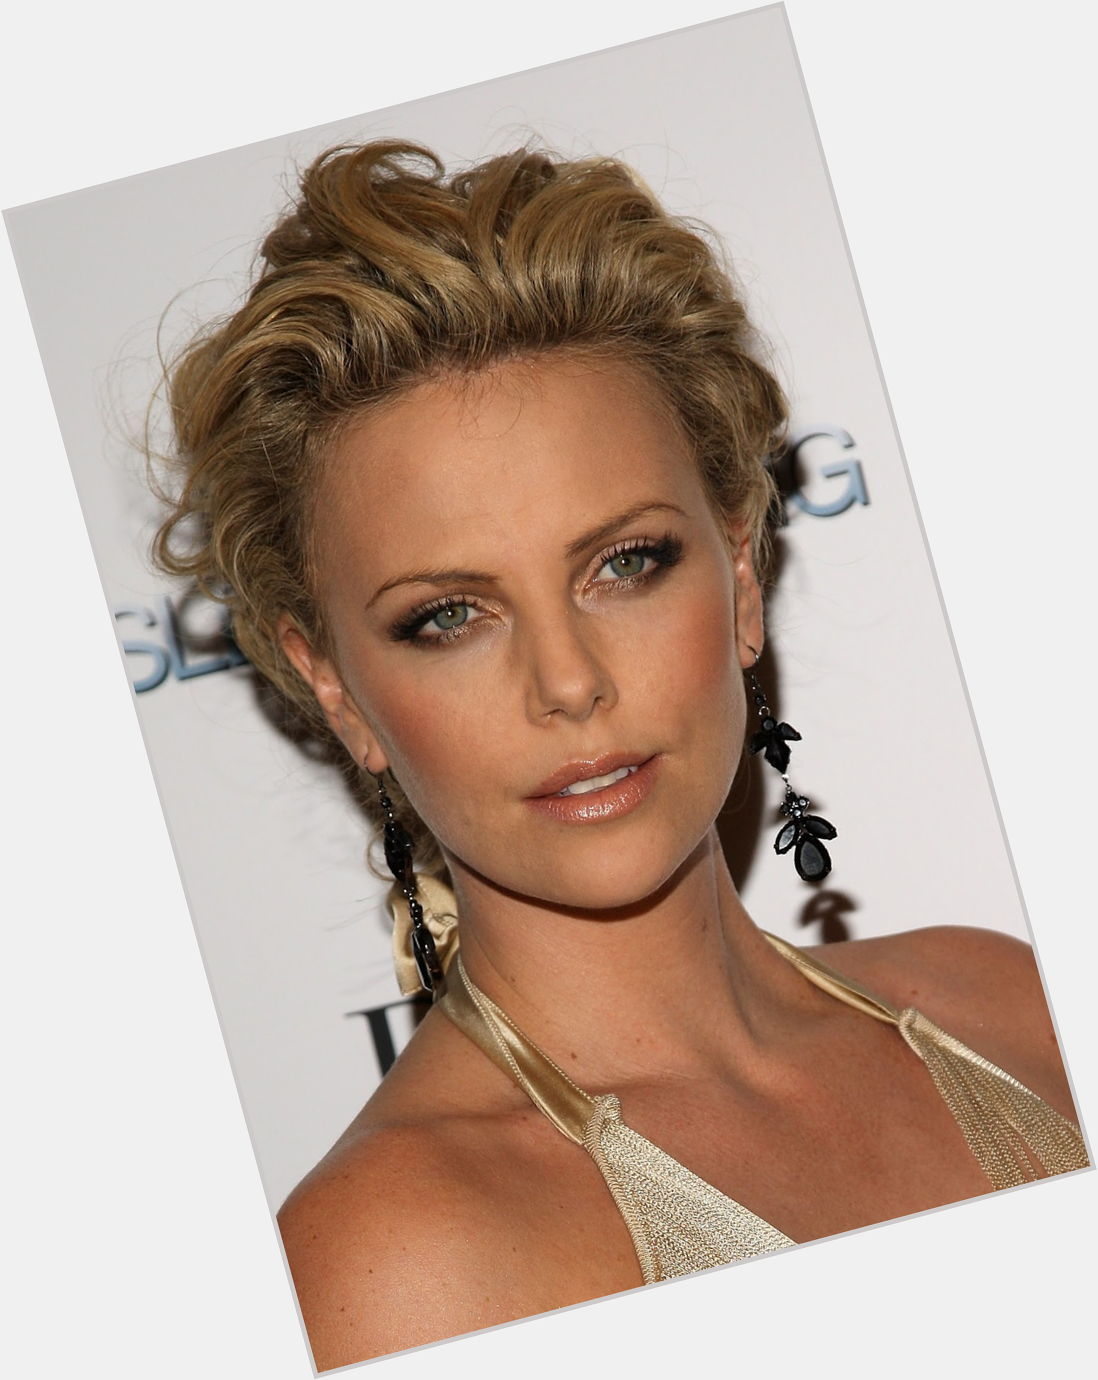 August 7, 2020
Happy birthday Charlize Theron 45 years old. 